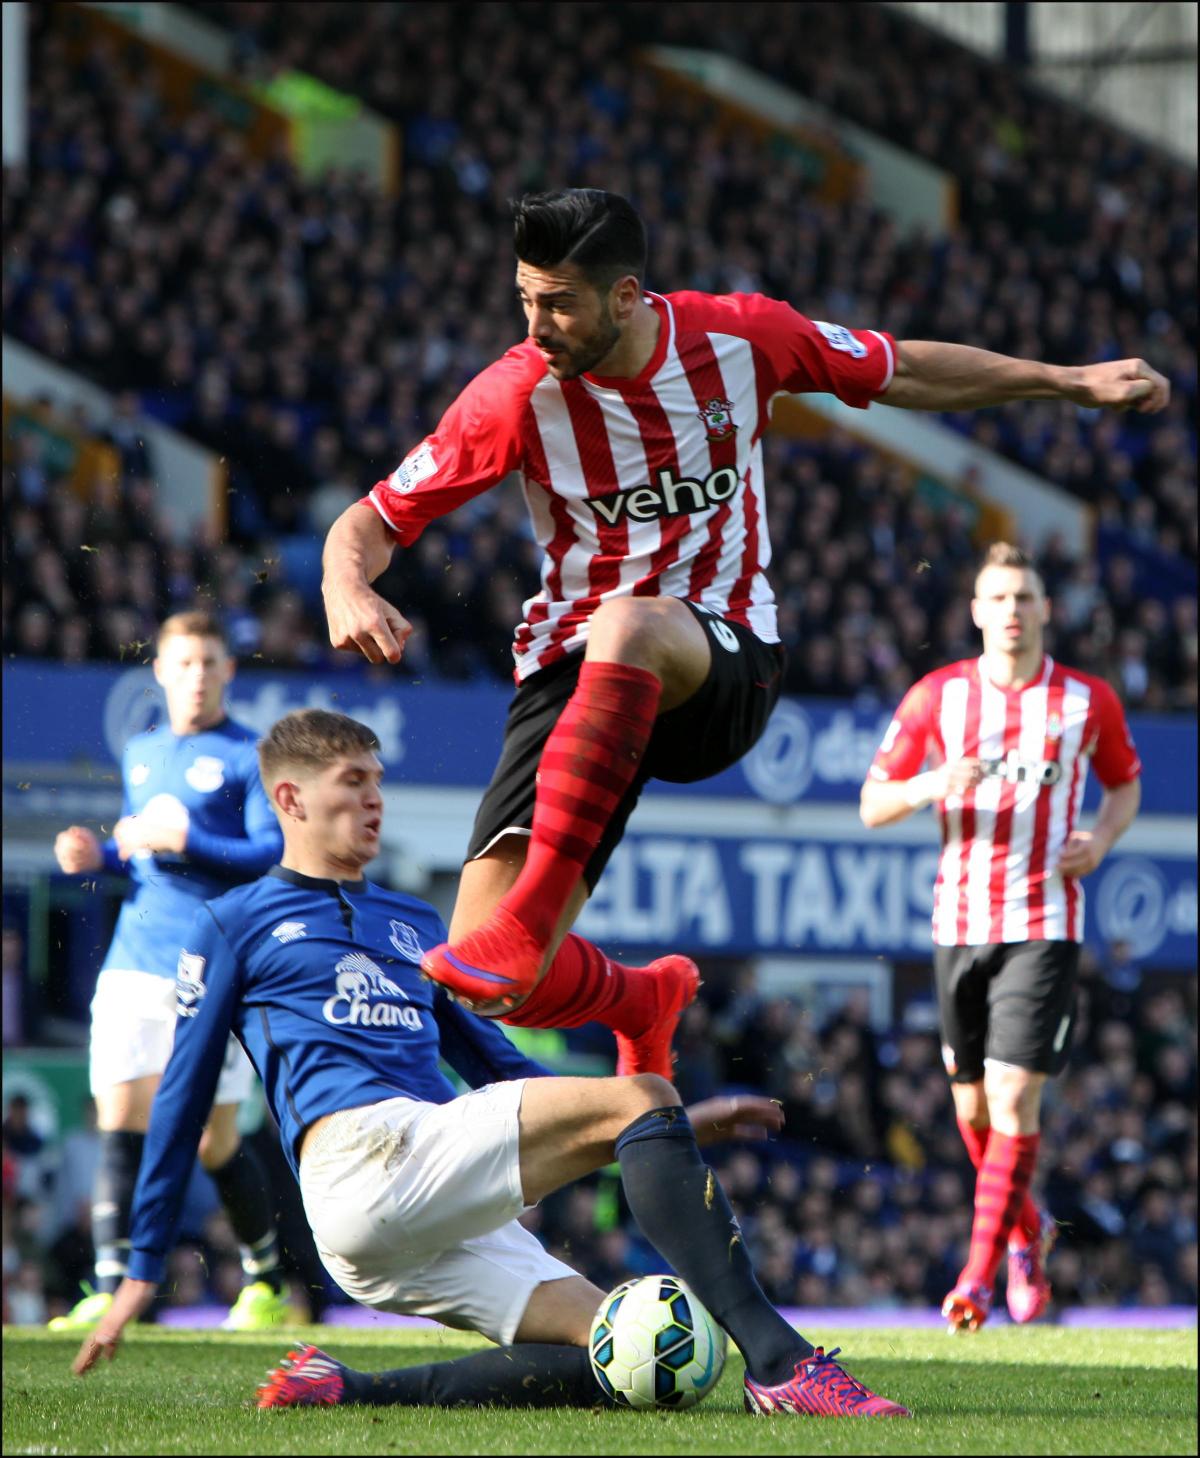 Pelle leaps over a challenge